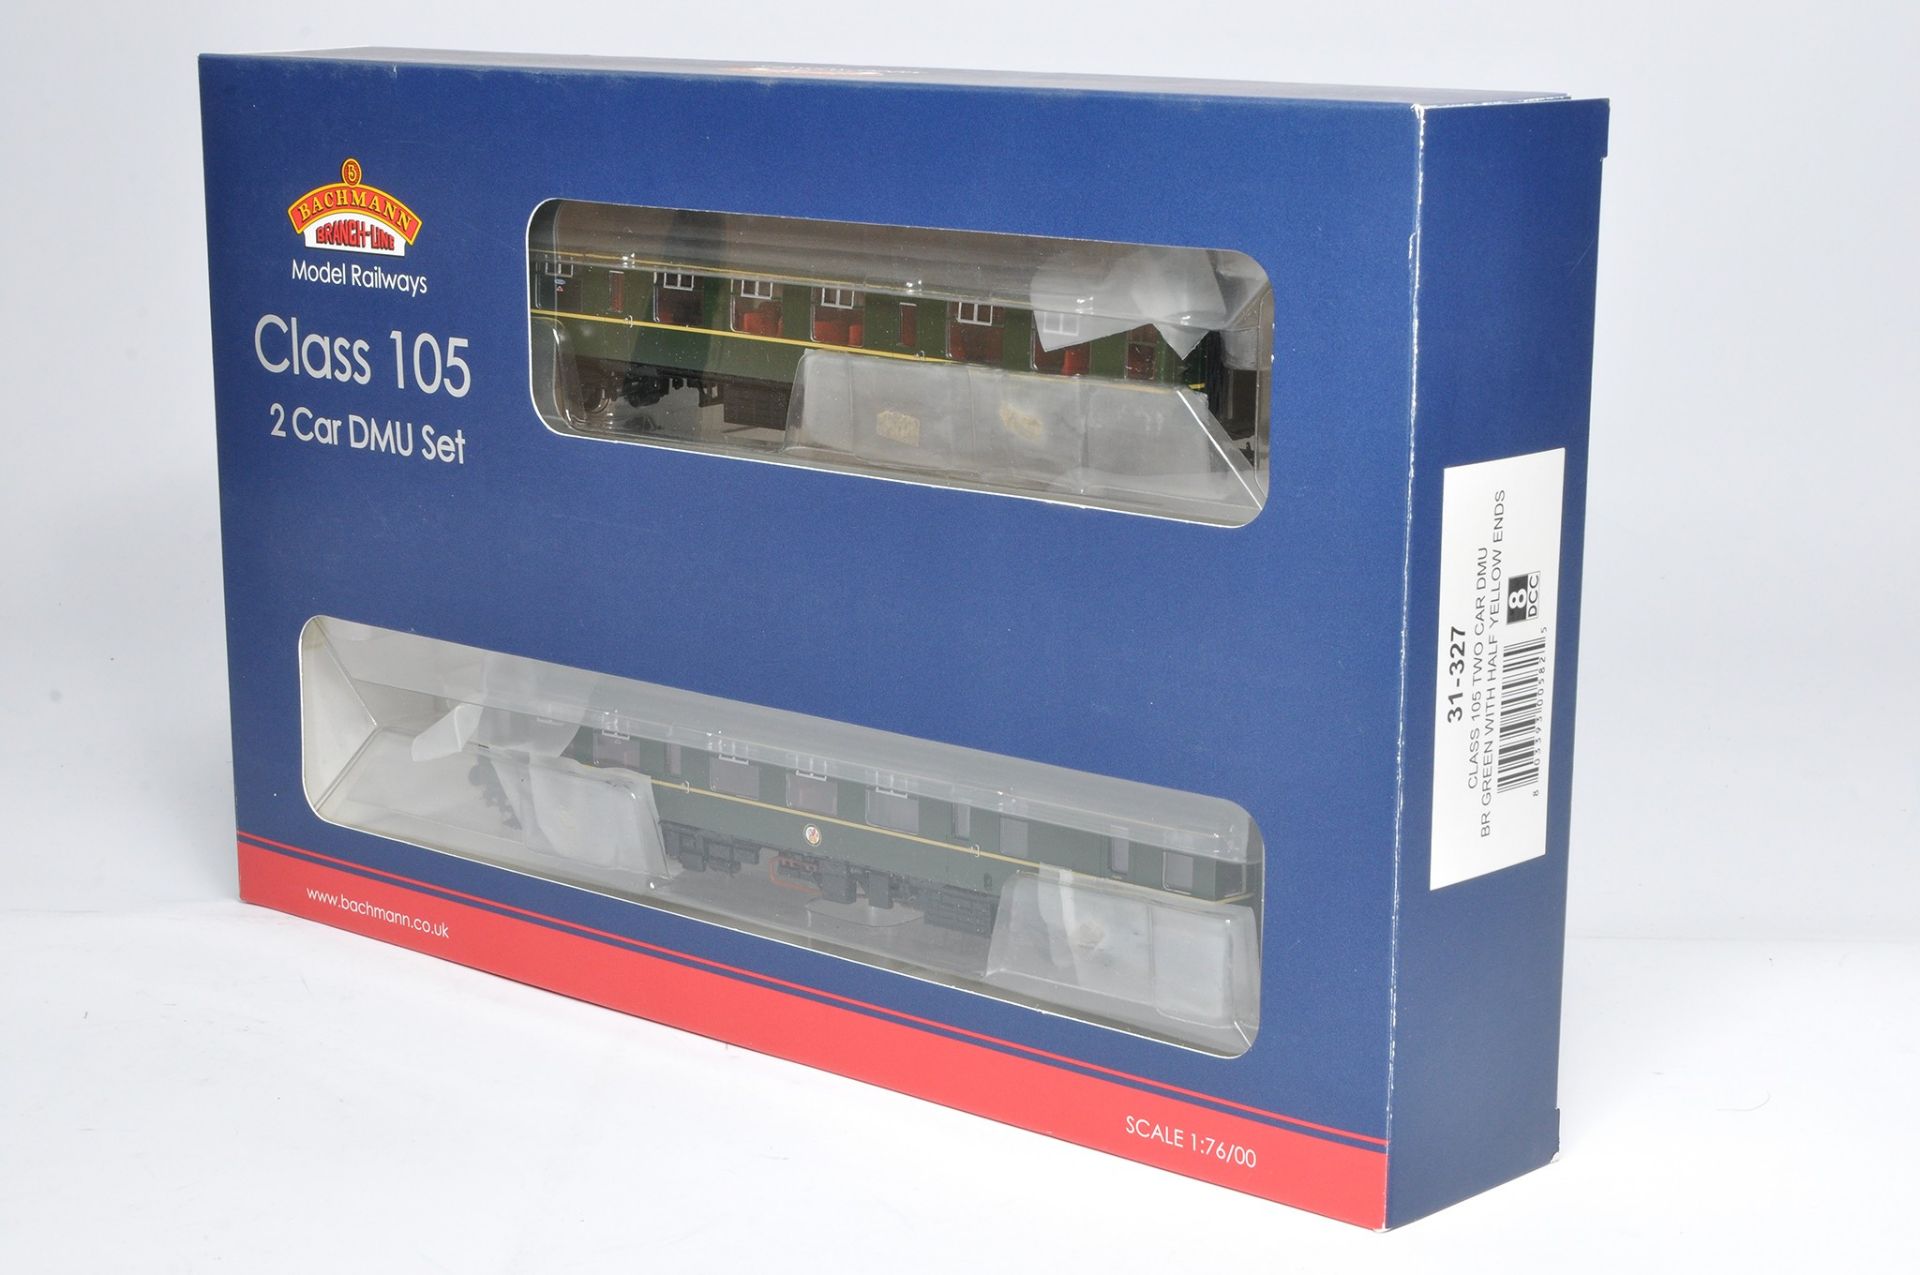 Bachmann Model Railway comprising locomotive issue No. 31-327 Class 105 Two Car DMU. Looks to be